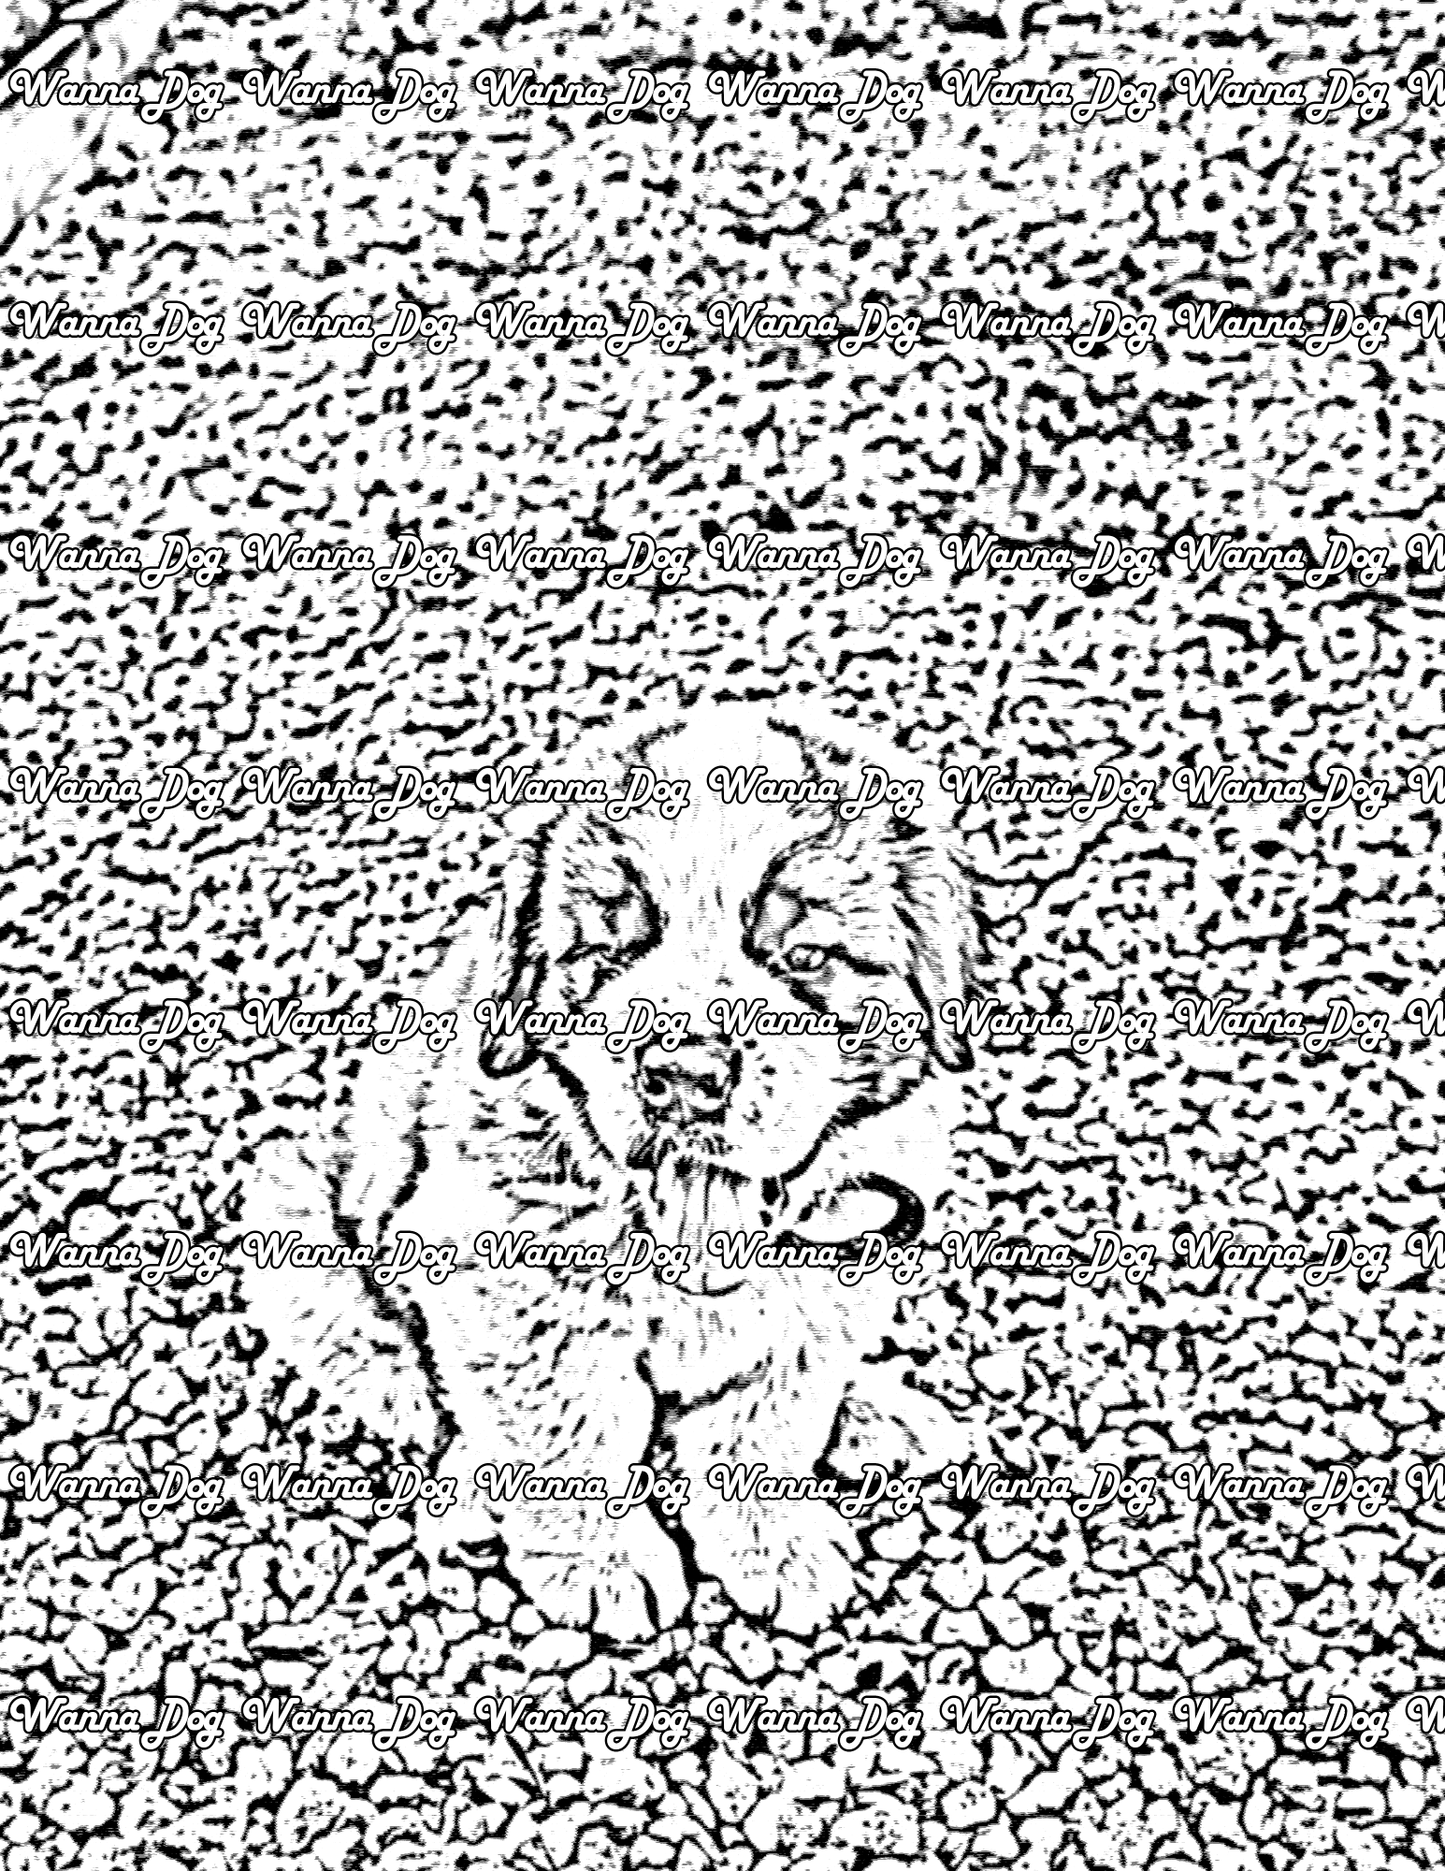 Saint Bernard Coloring Page of a Saint Bernard with their tongue out above the camera